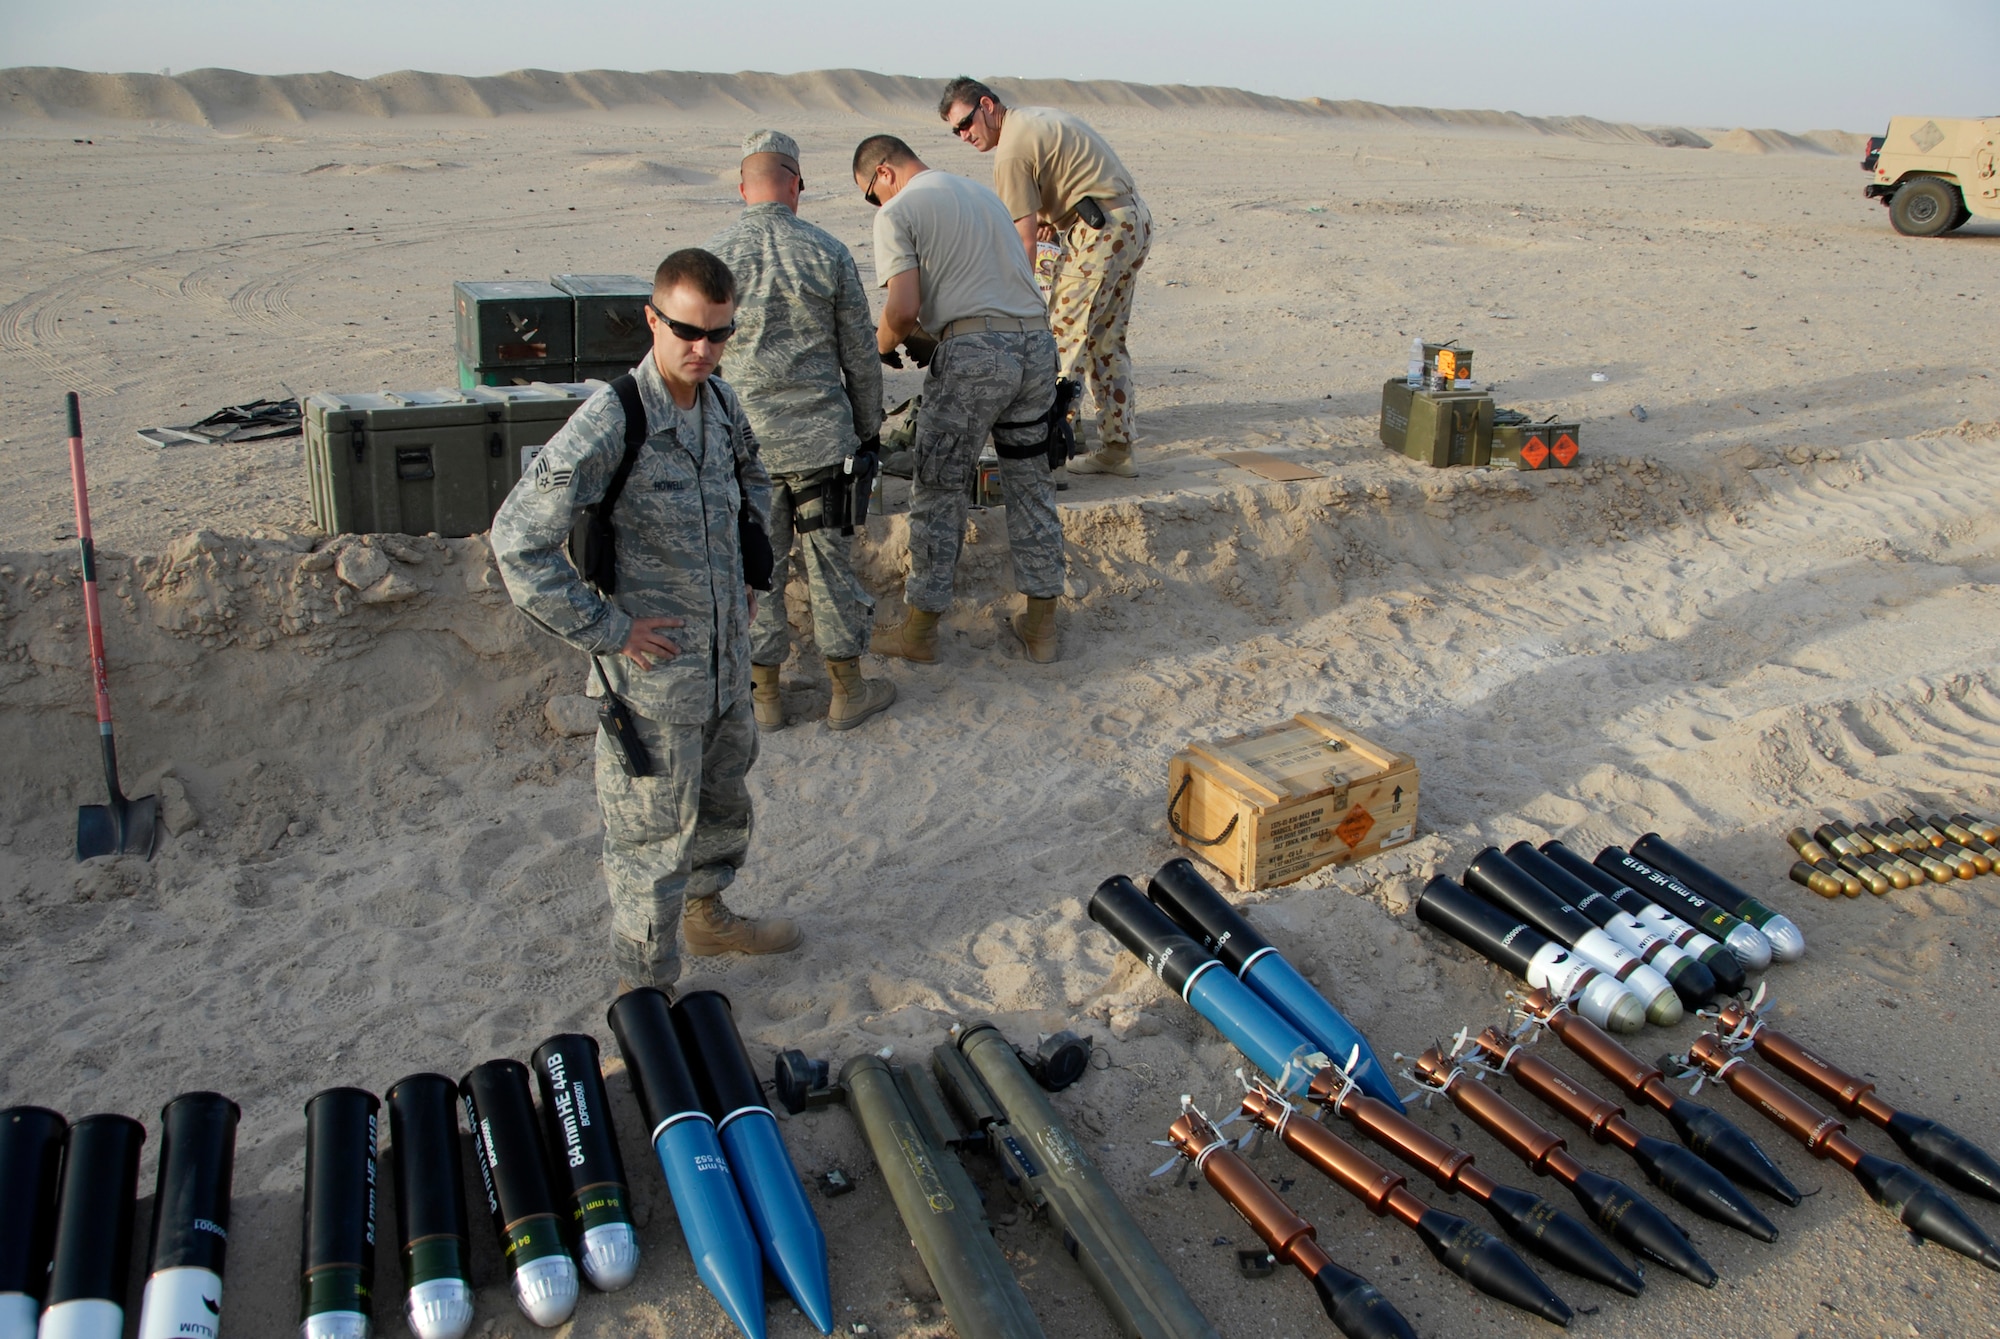 SOUTHWEST ASIA -- Senior Airman Charles Howell, (front center), from the 386th Expeditionary Civil Engineer Squadron explosive ordnance disposal flight, looks over the munitions that are about to be destroyed, while other members from his EOD flight and Australian Army ammunition technicians prepare light anti-armor weapon rockets for disposal during a controlled detonation June 20, 2008, at an explosive ordinance disposal range in the Persian Gulf Region.  The joint detonation also provided an opportunity for the coalition forces to enhance relations while learning some of the slight differences in operating procedures.  (U.S. Air Force photo/ Staff Sgt. Patrick Dixon)